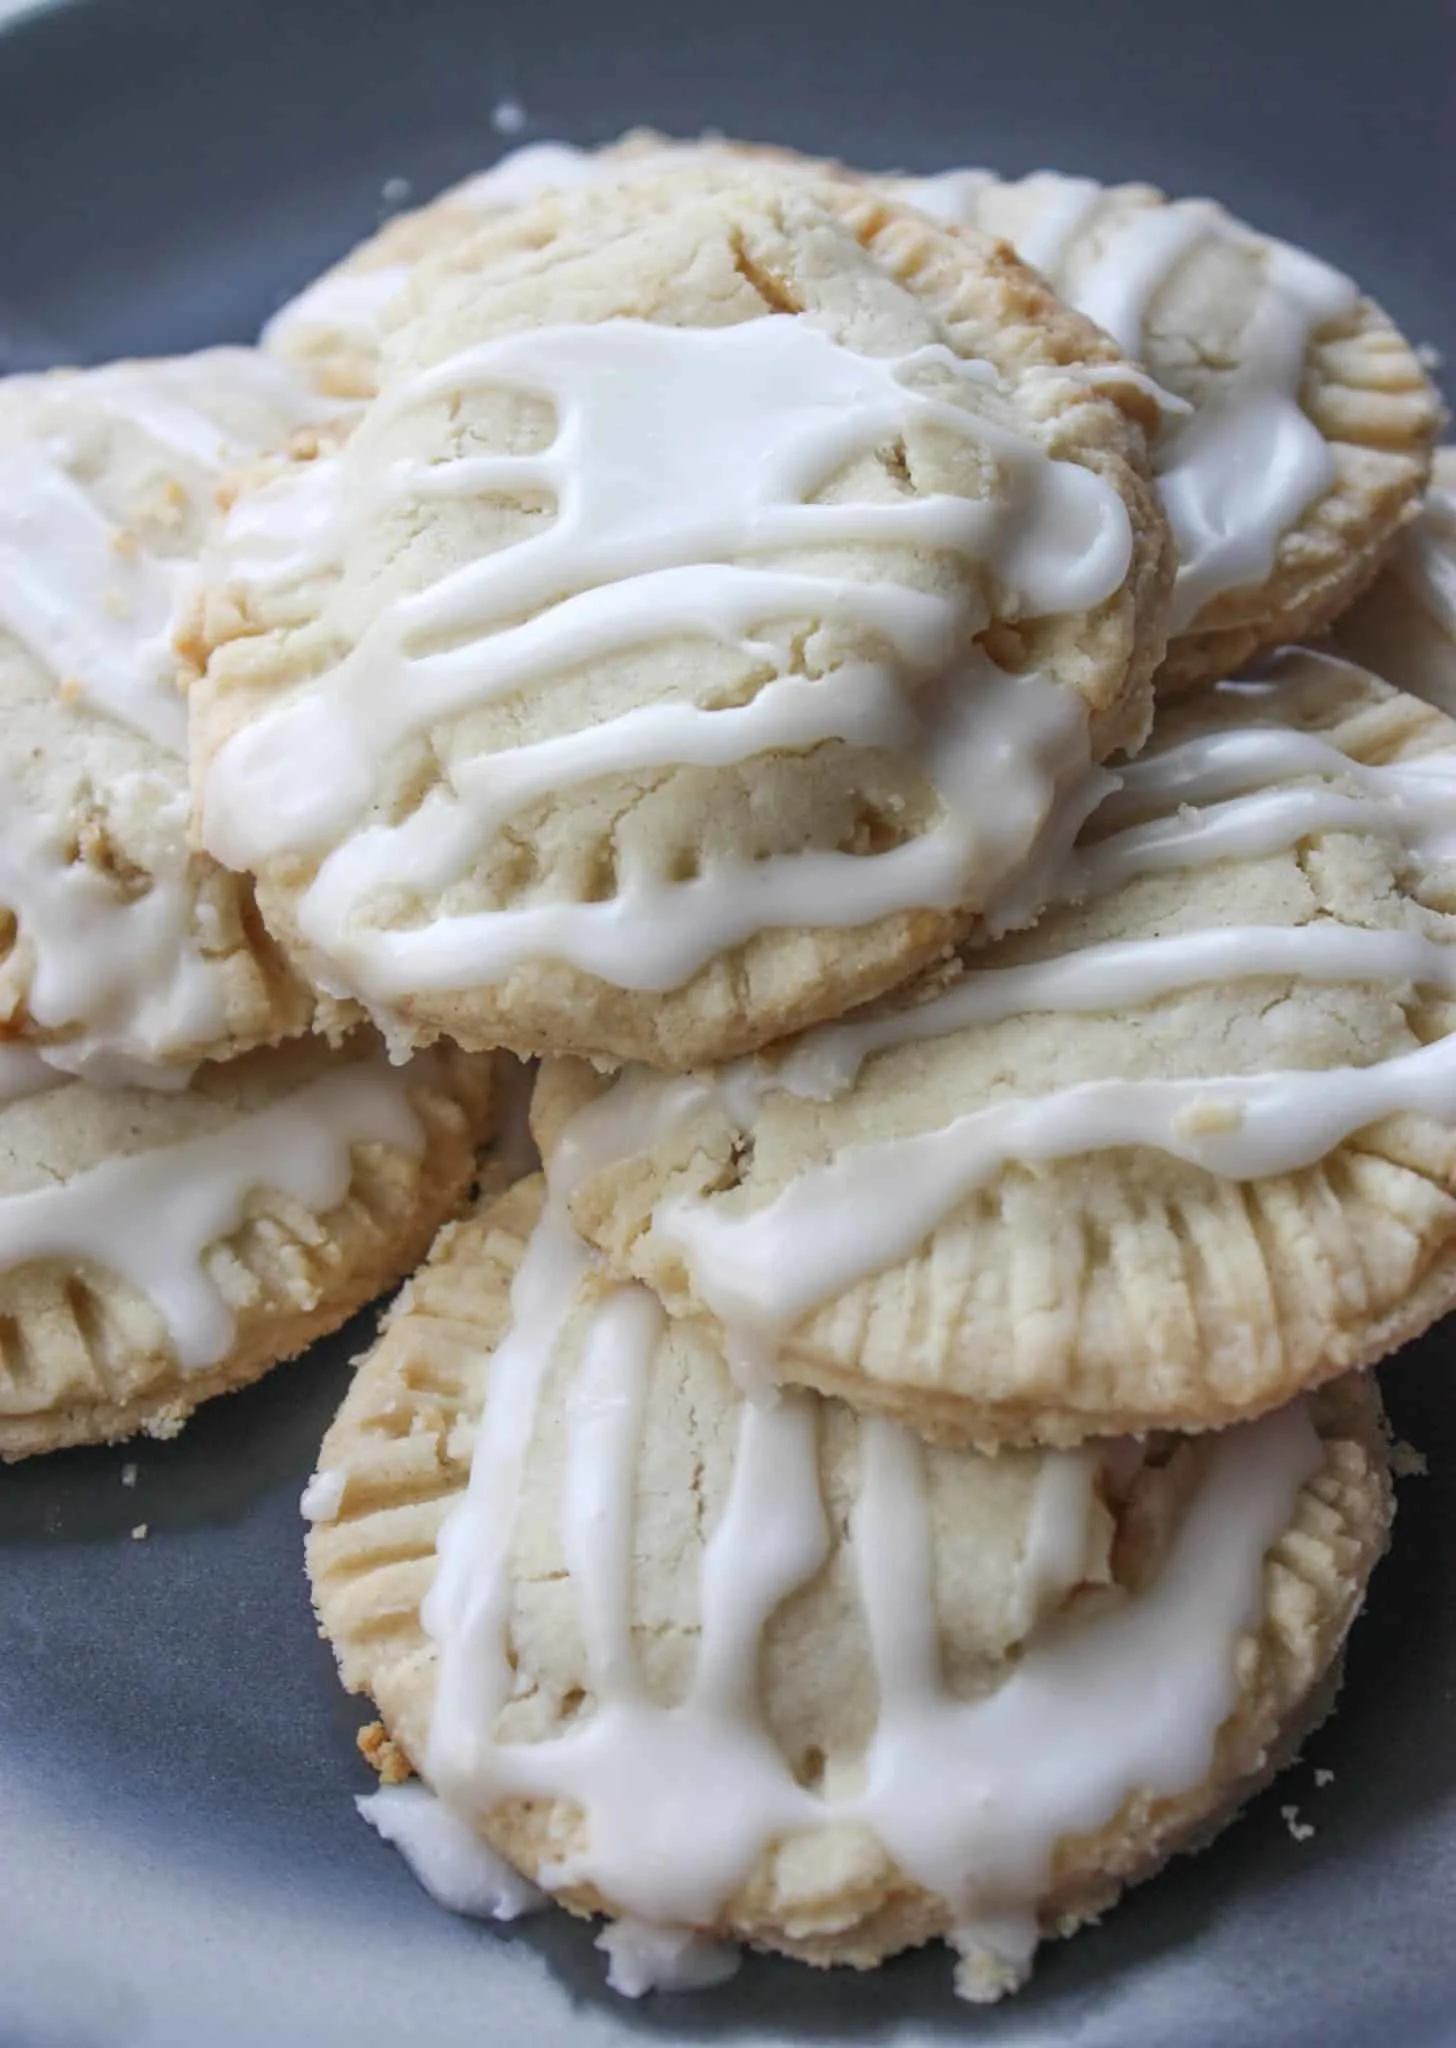 Apple Pie Patties are a great way to use canned apple pie filling. This gluten free pastry would be a delicious accompaniment to your afternoon tea!